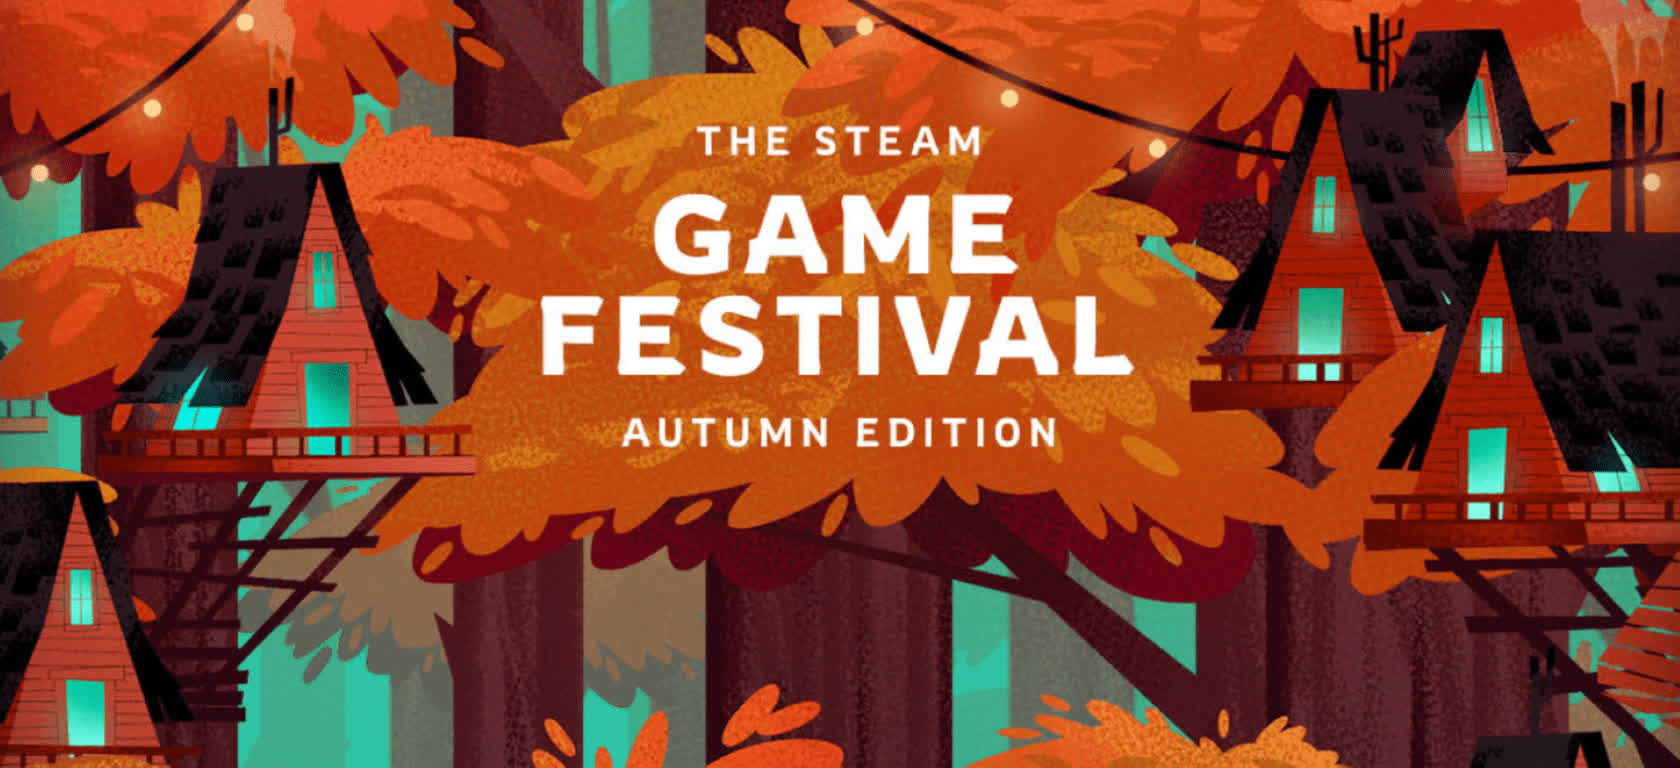 Steam's Autumn Game Festival arrives with hundreds of new game demos